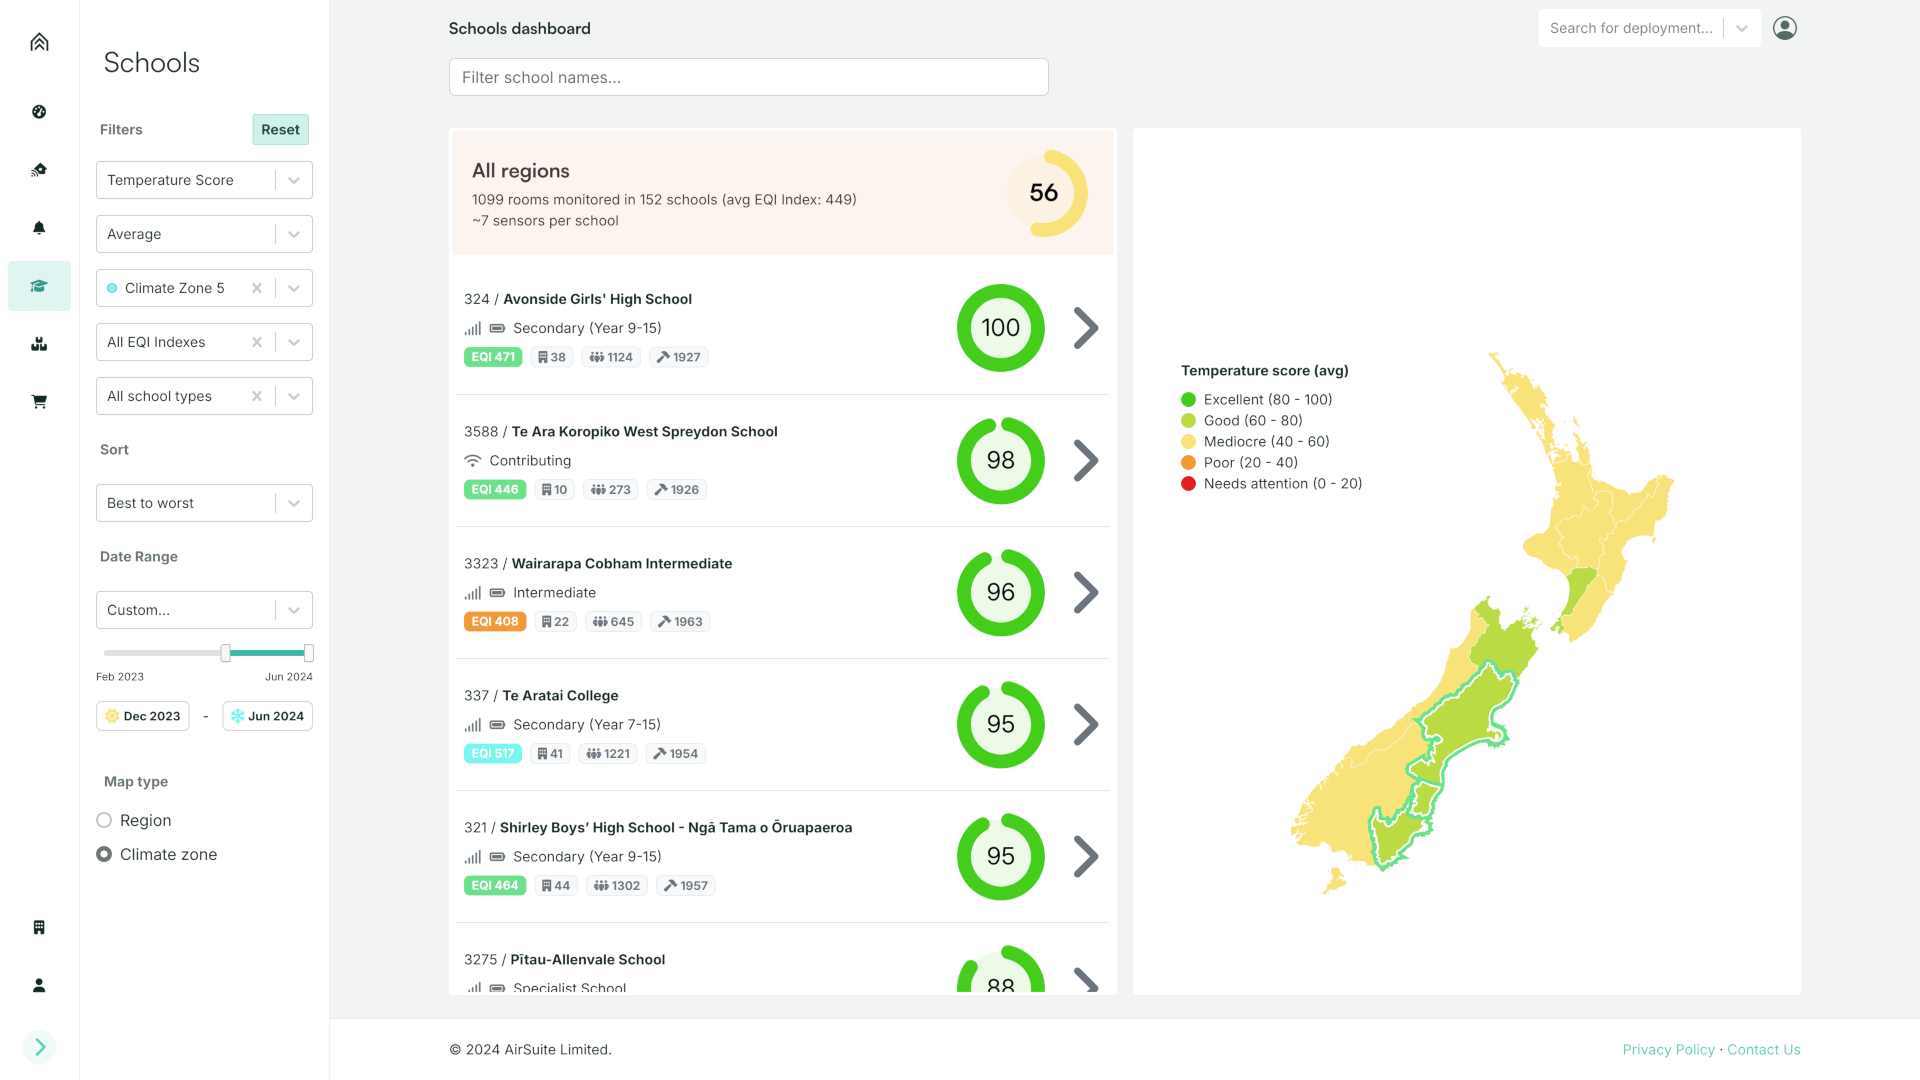 The AirSuite Schools Dashboard